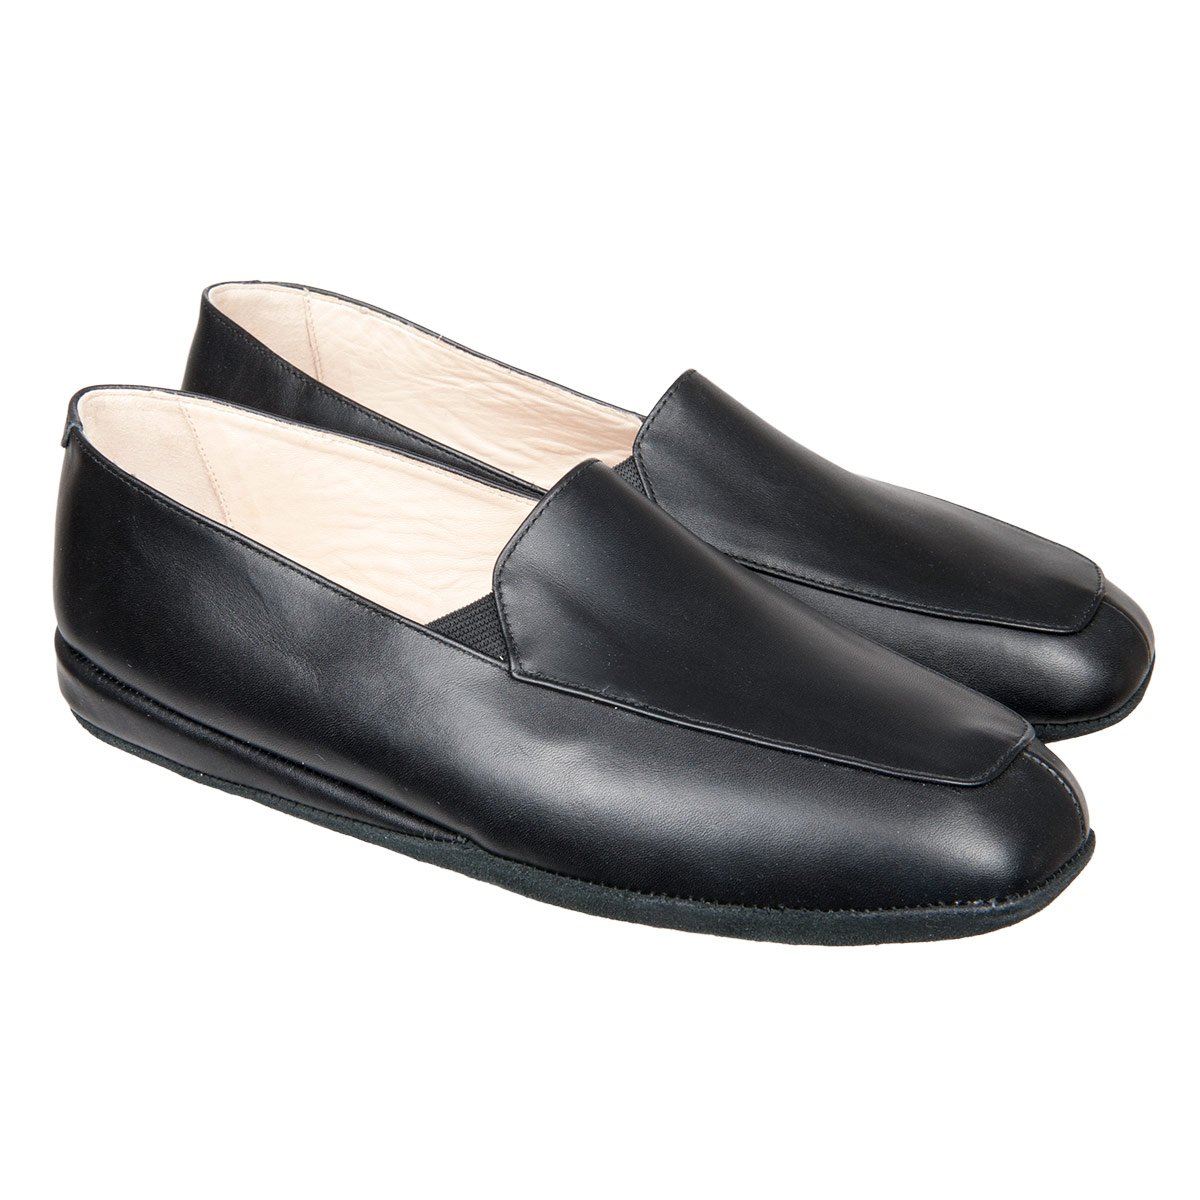 Leather slippers handmade Italy in high-quality and robust for men